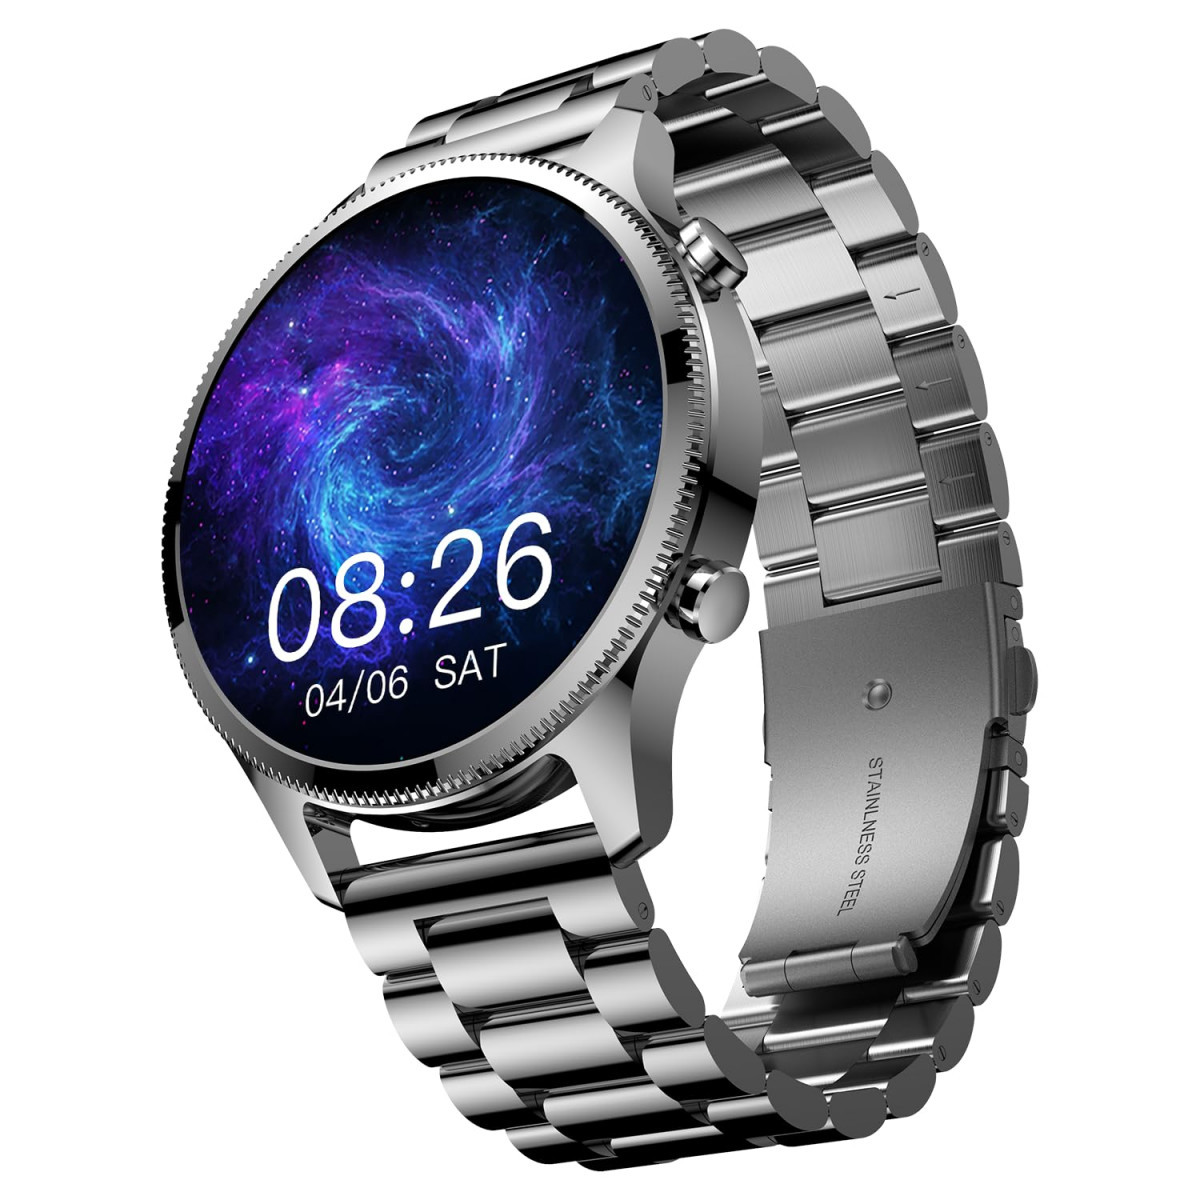 Noise Halo Plus Elite Edition Smartwatch with 146 Super AMOLED Display Stainless Steel Finish Metallic Straps